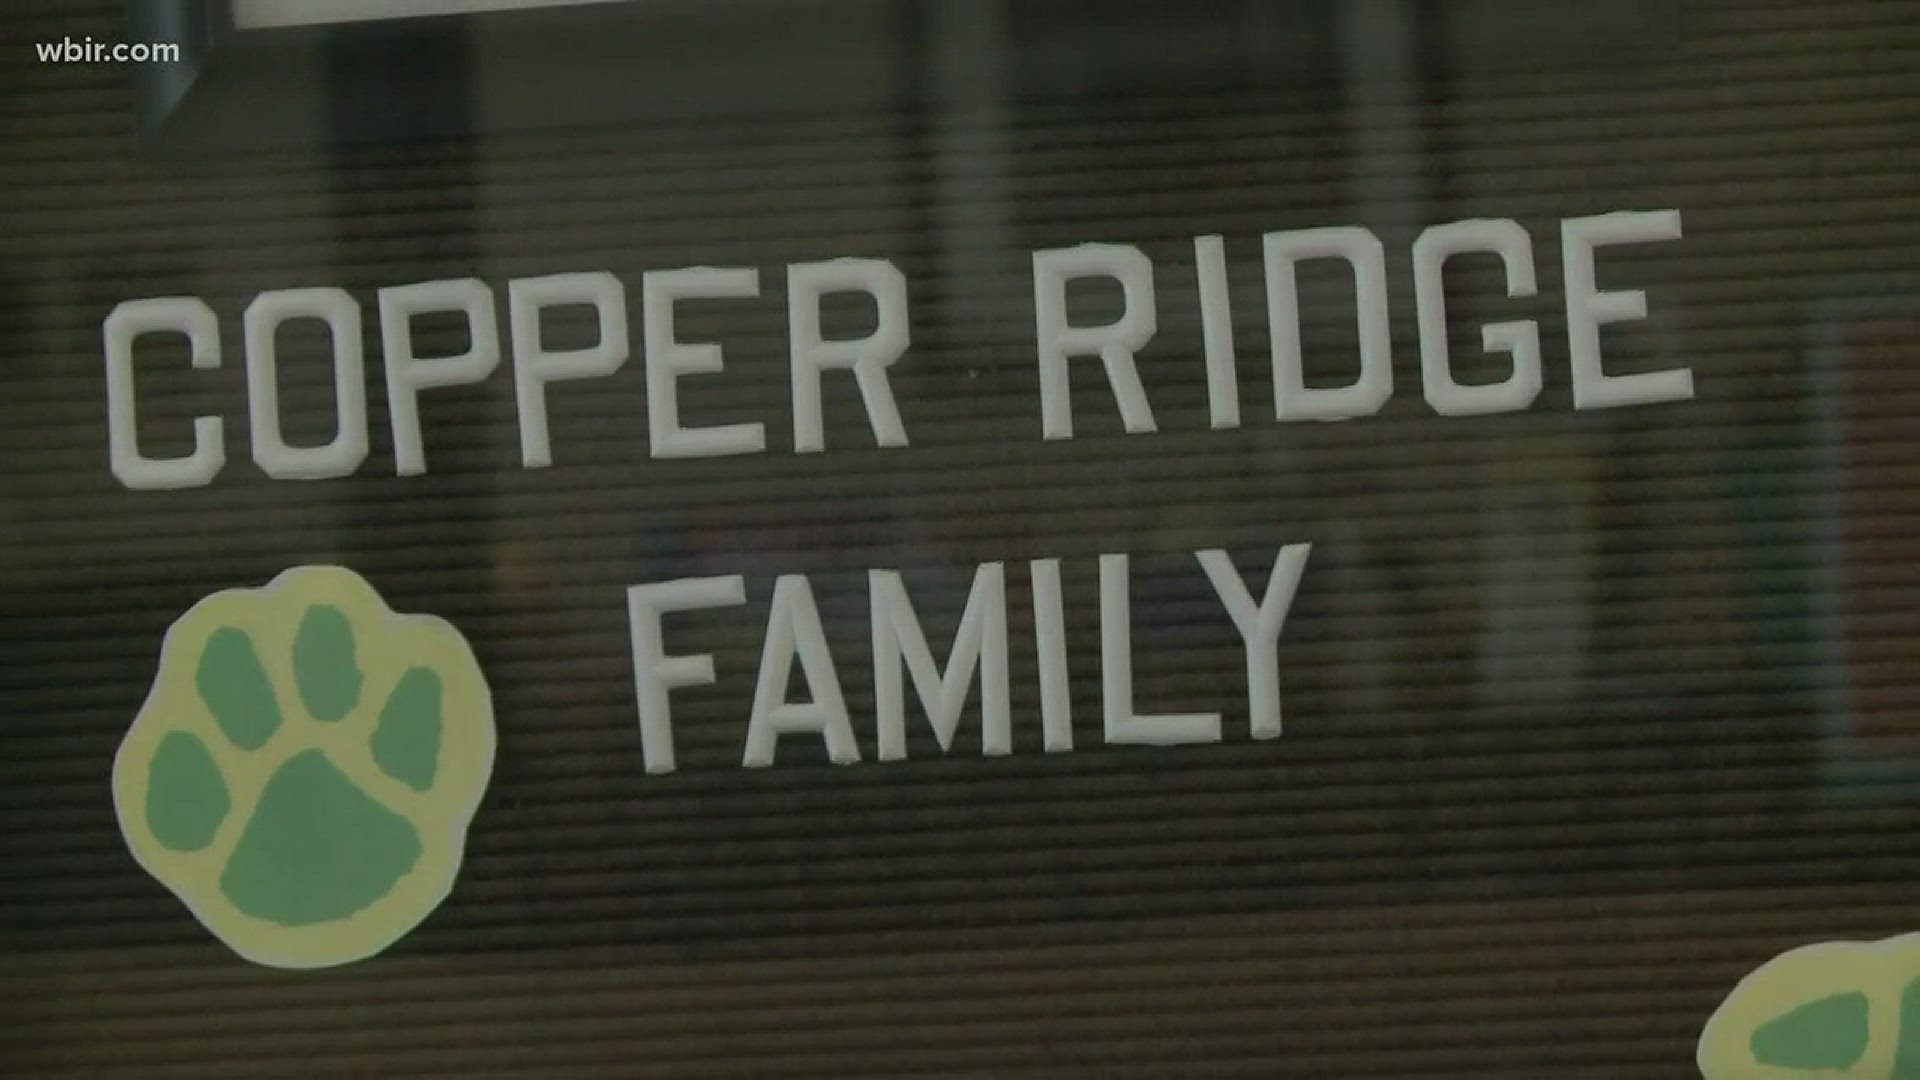 Volunteers and Copper Ridge Elementary School to give food to families in need this summer.